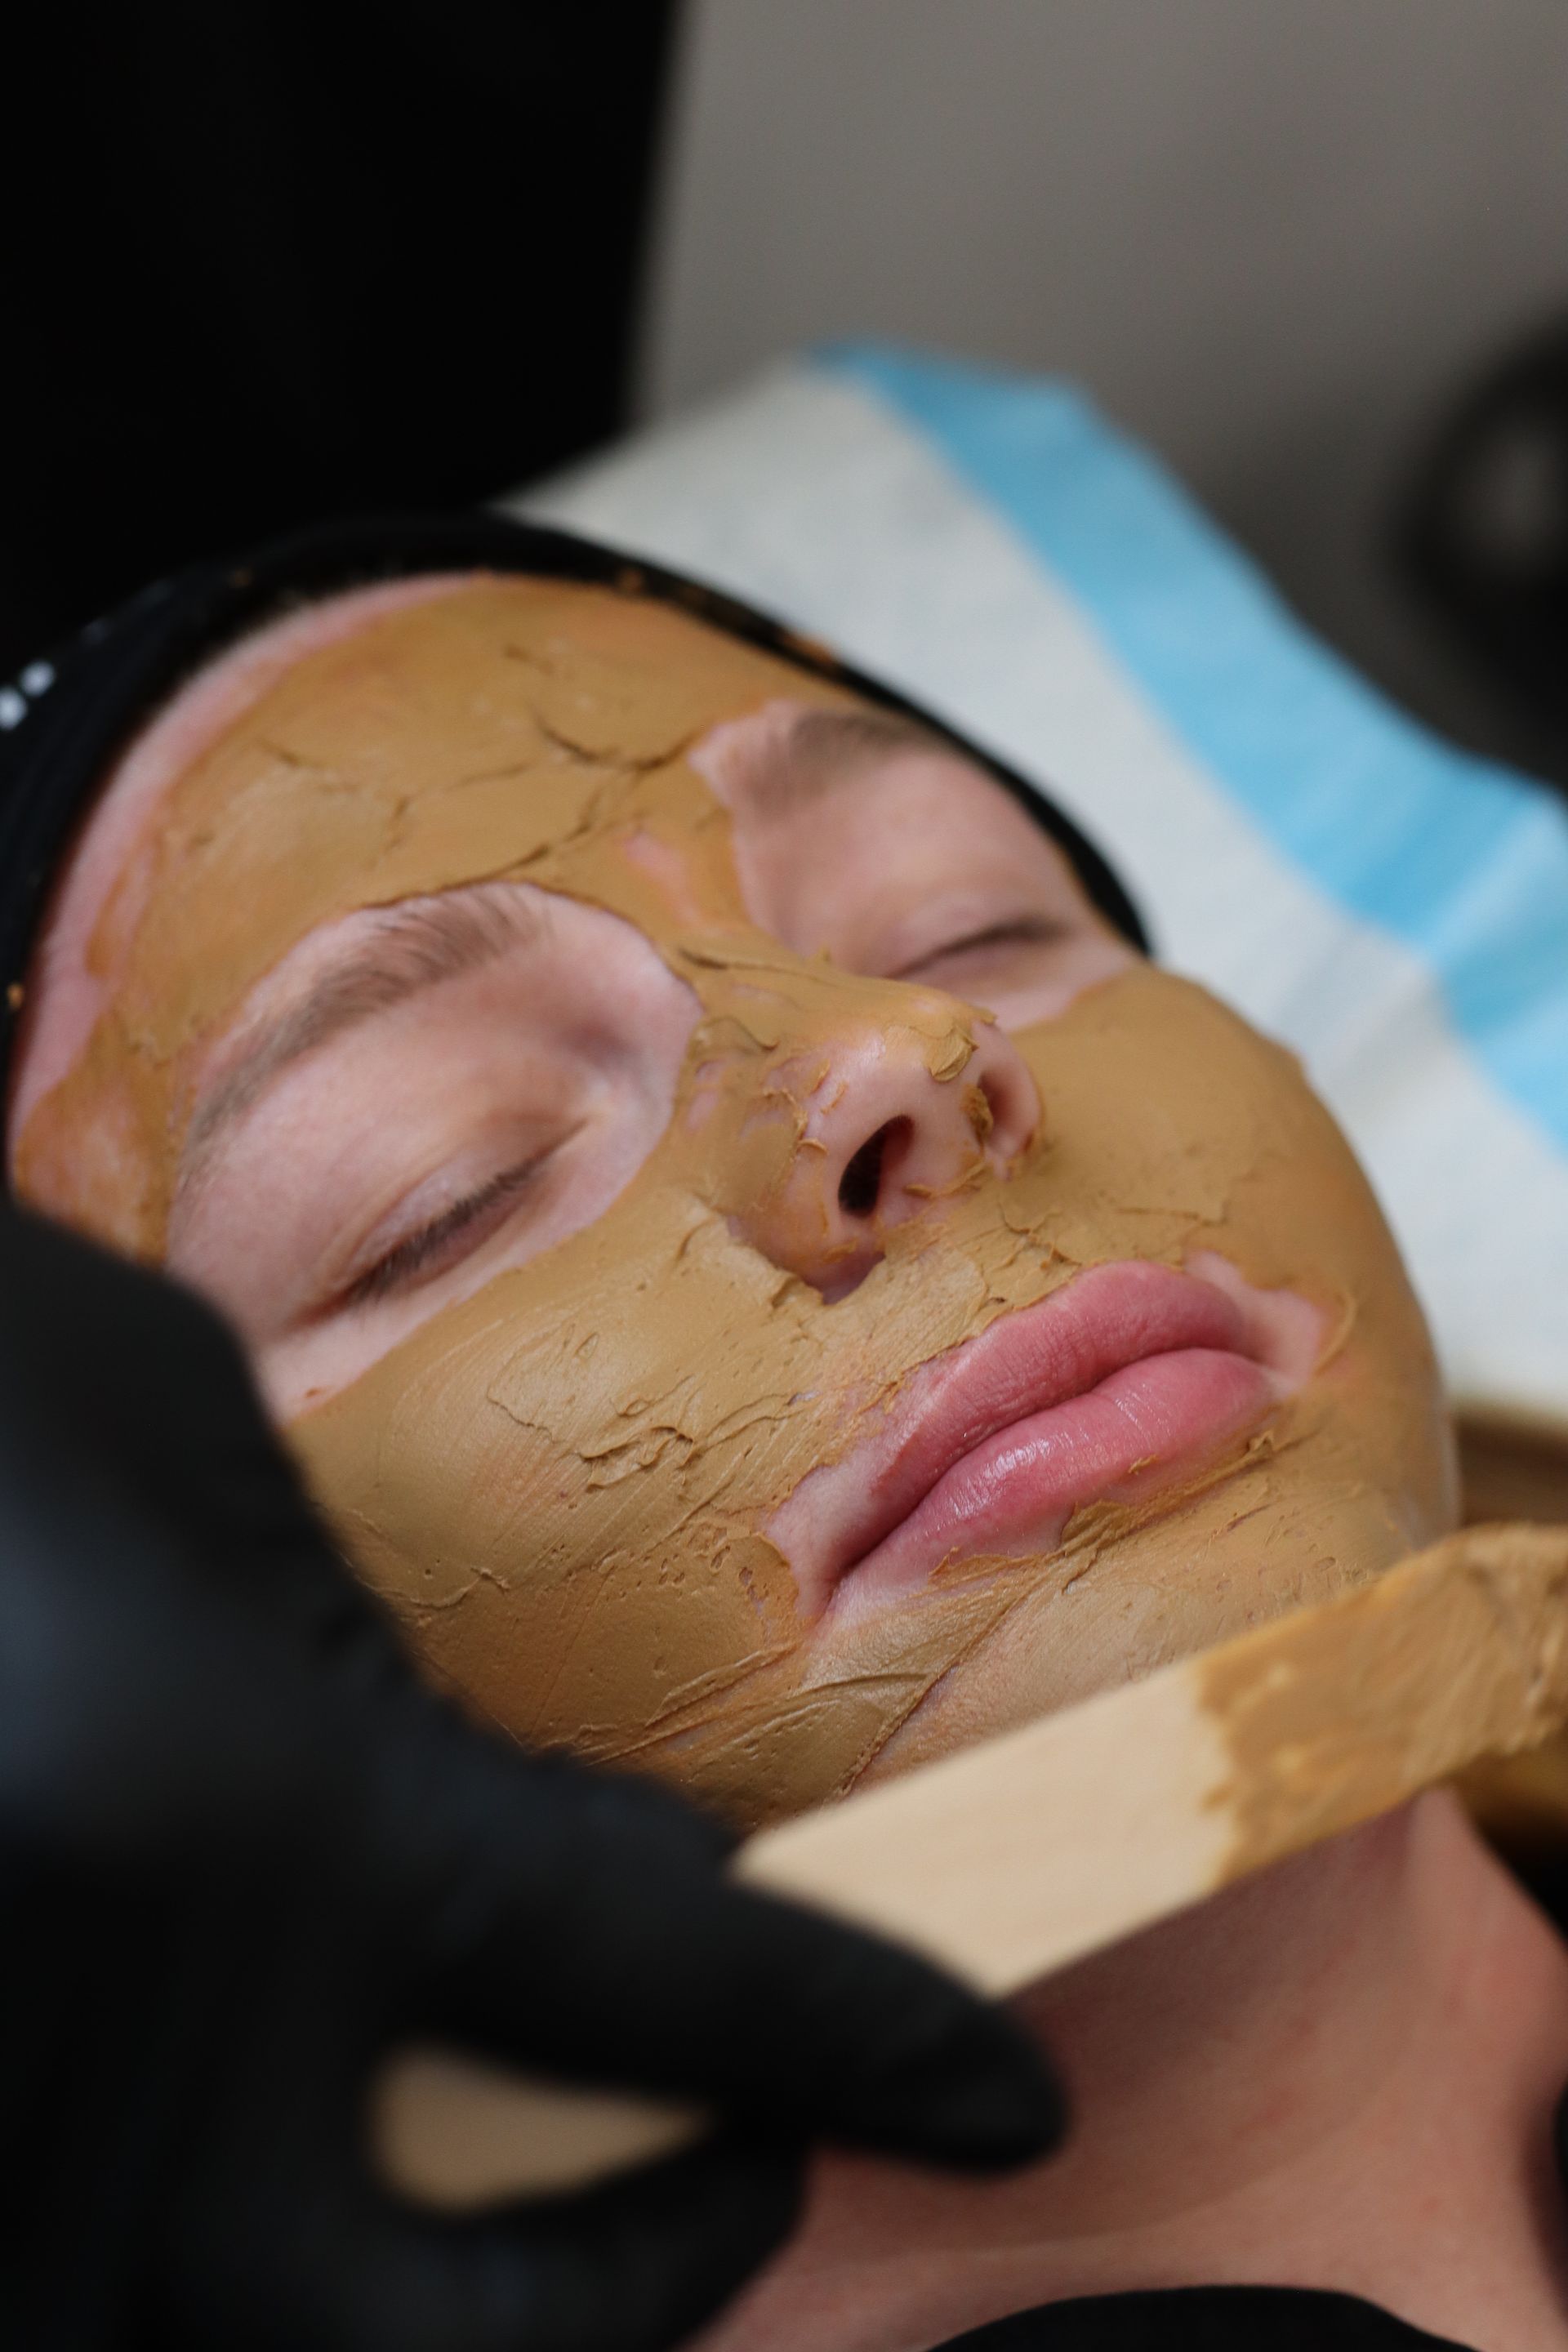 Client Receiving Professional Cosmelan Peel Application for Melasma and Hyperpigmentation at Windermere Medical Spa in Orlando - Expert Care in a Luxurious Setting for Enhanced Skin Radiance and Tone Correction